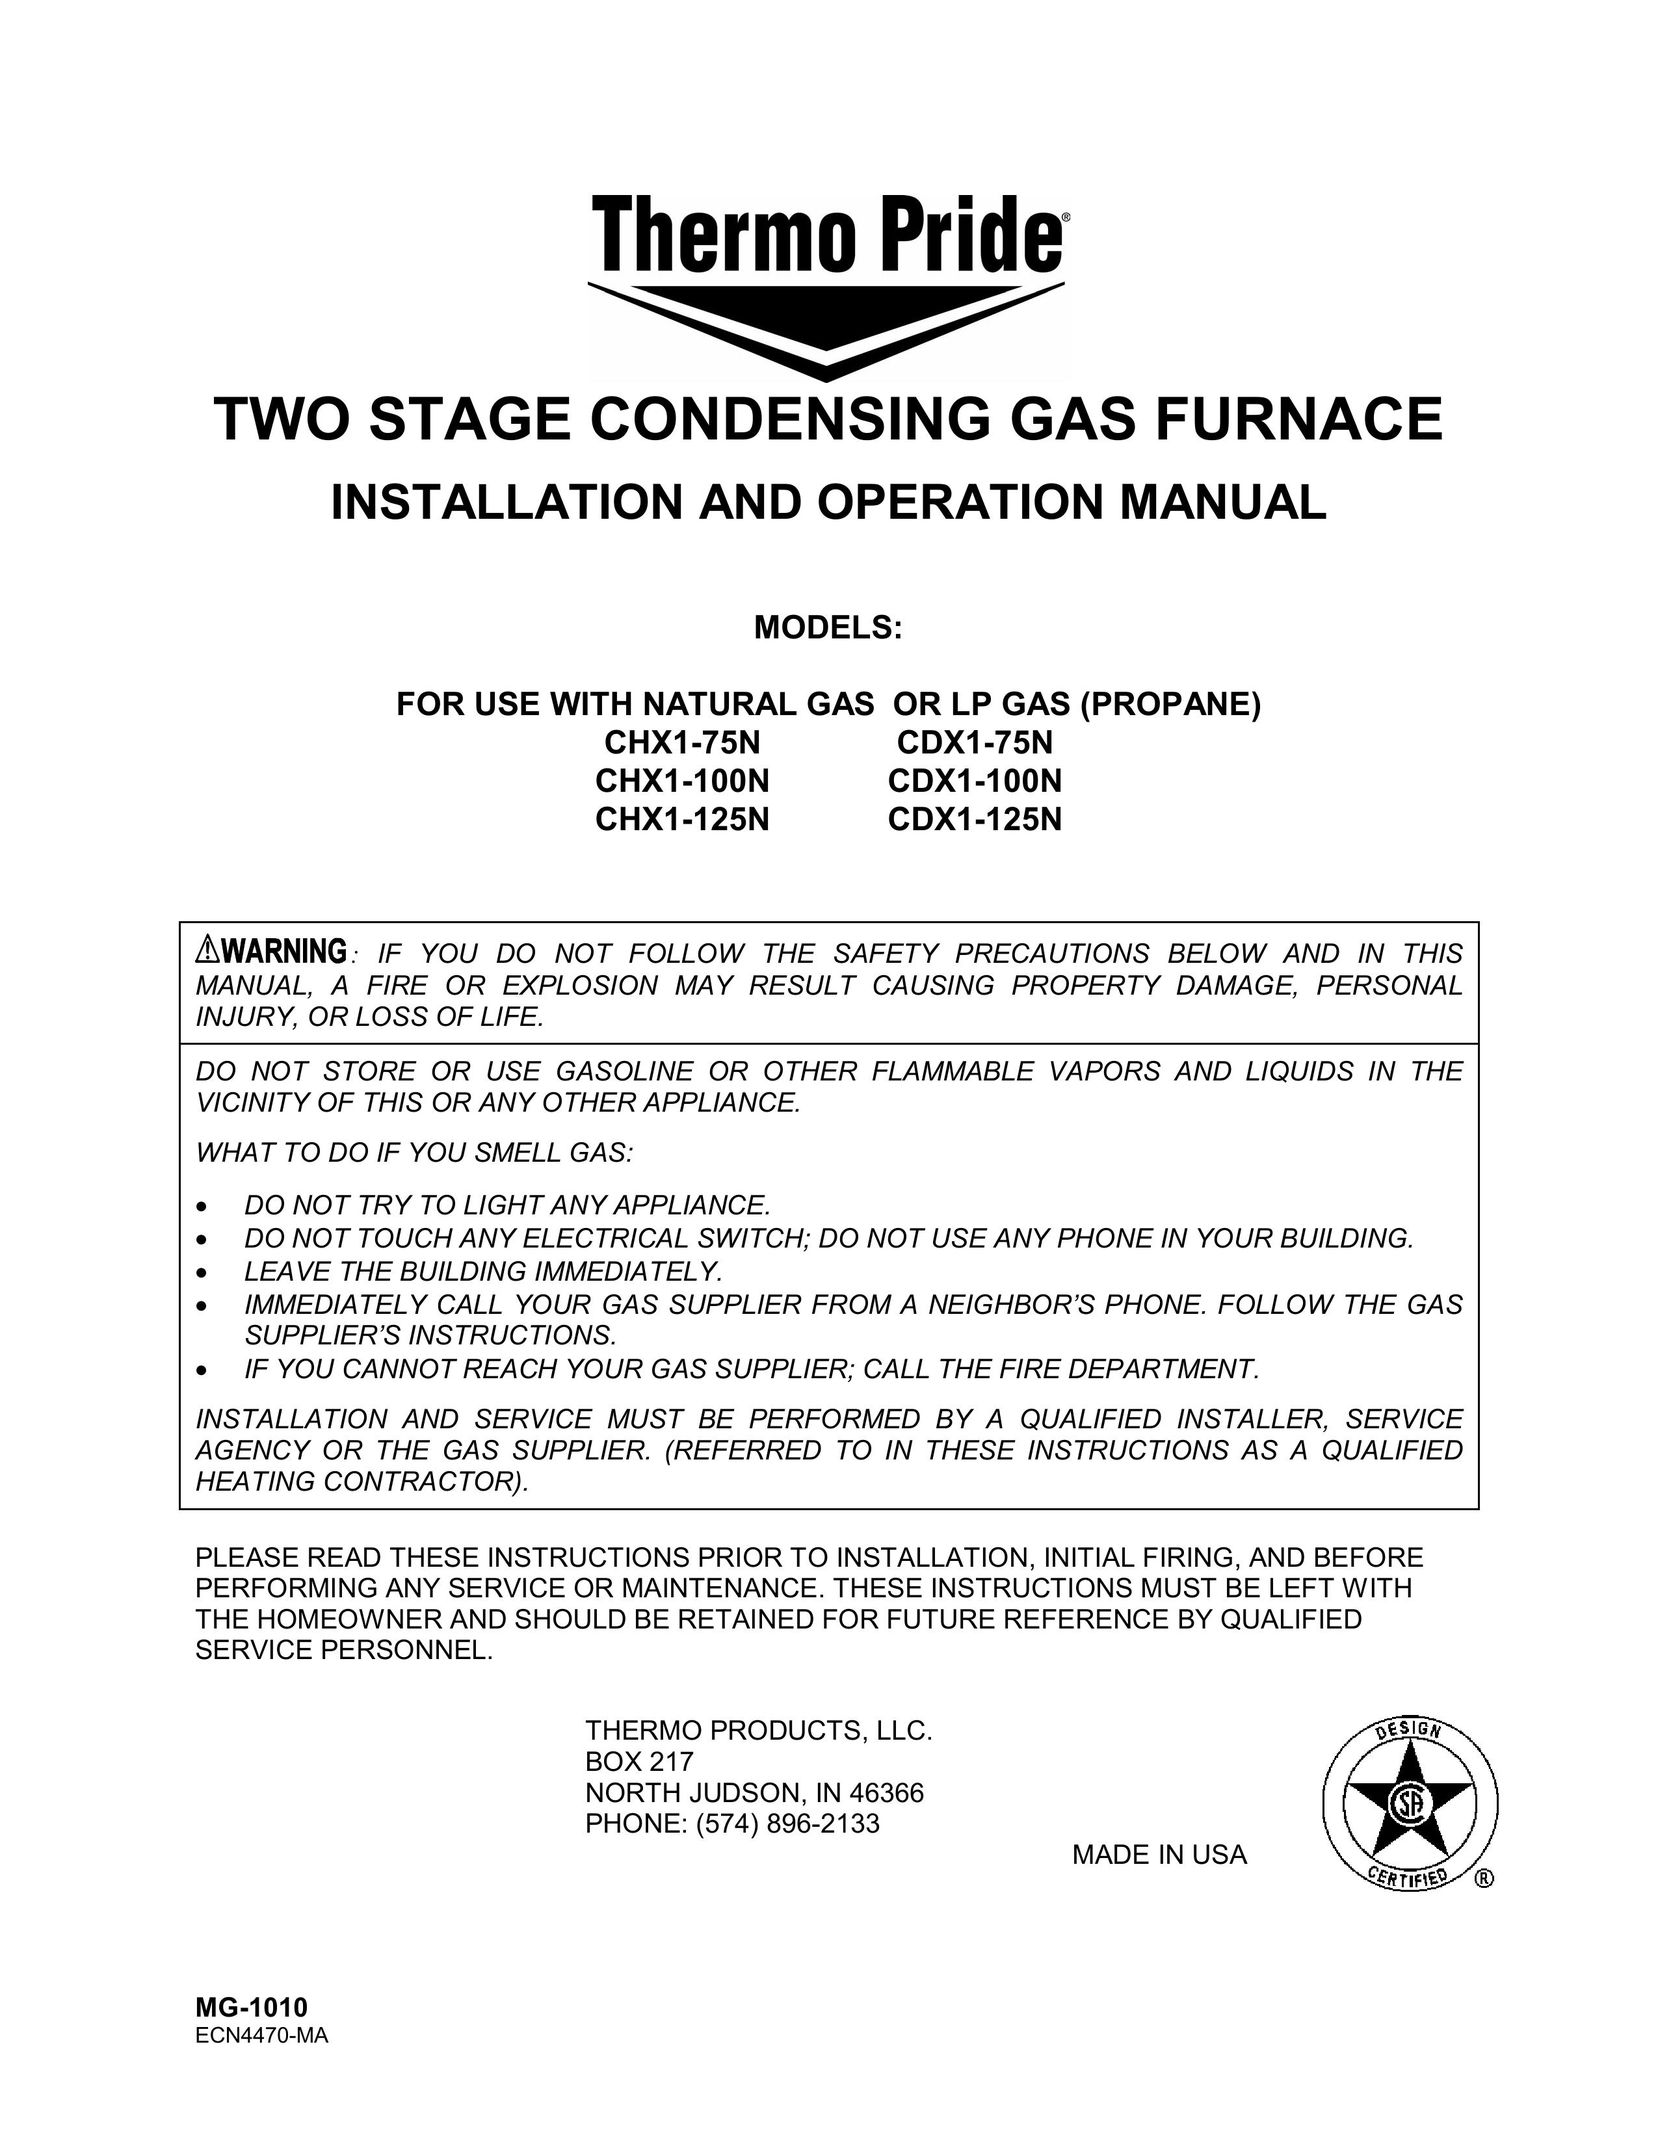 Thermo Products CDX1-100N Furnace User Manual